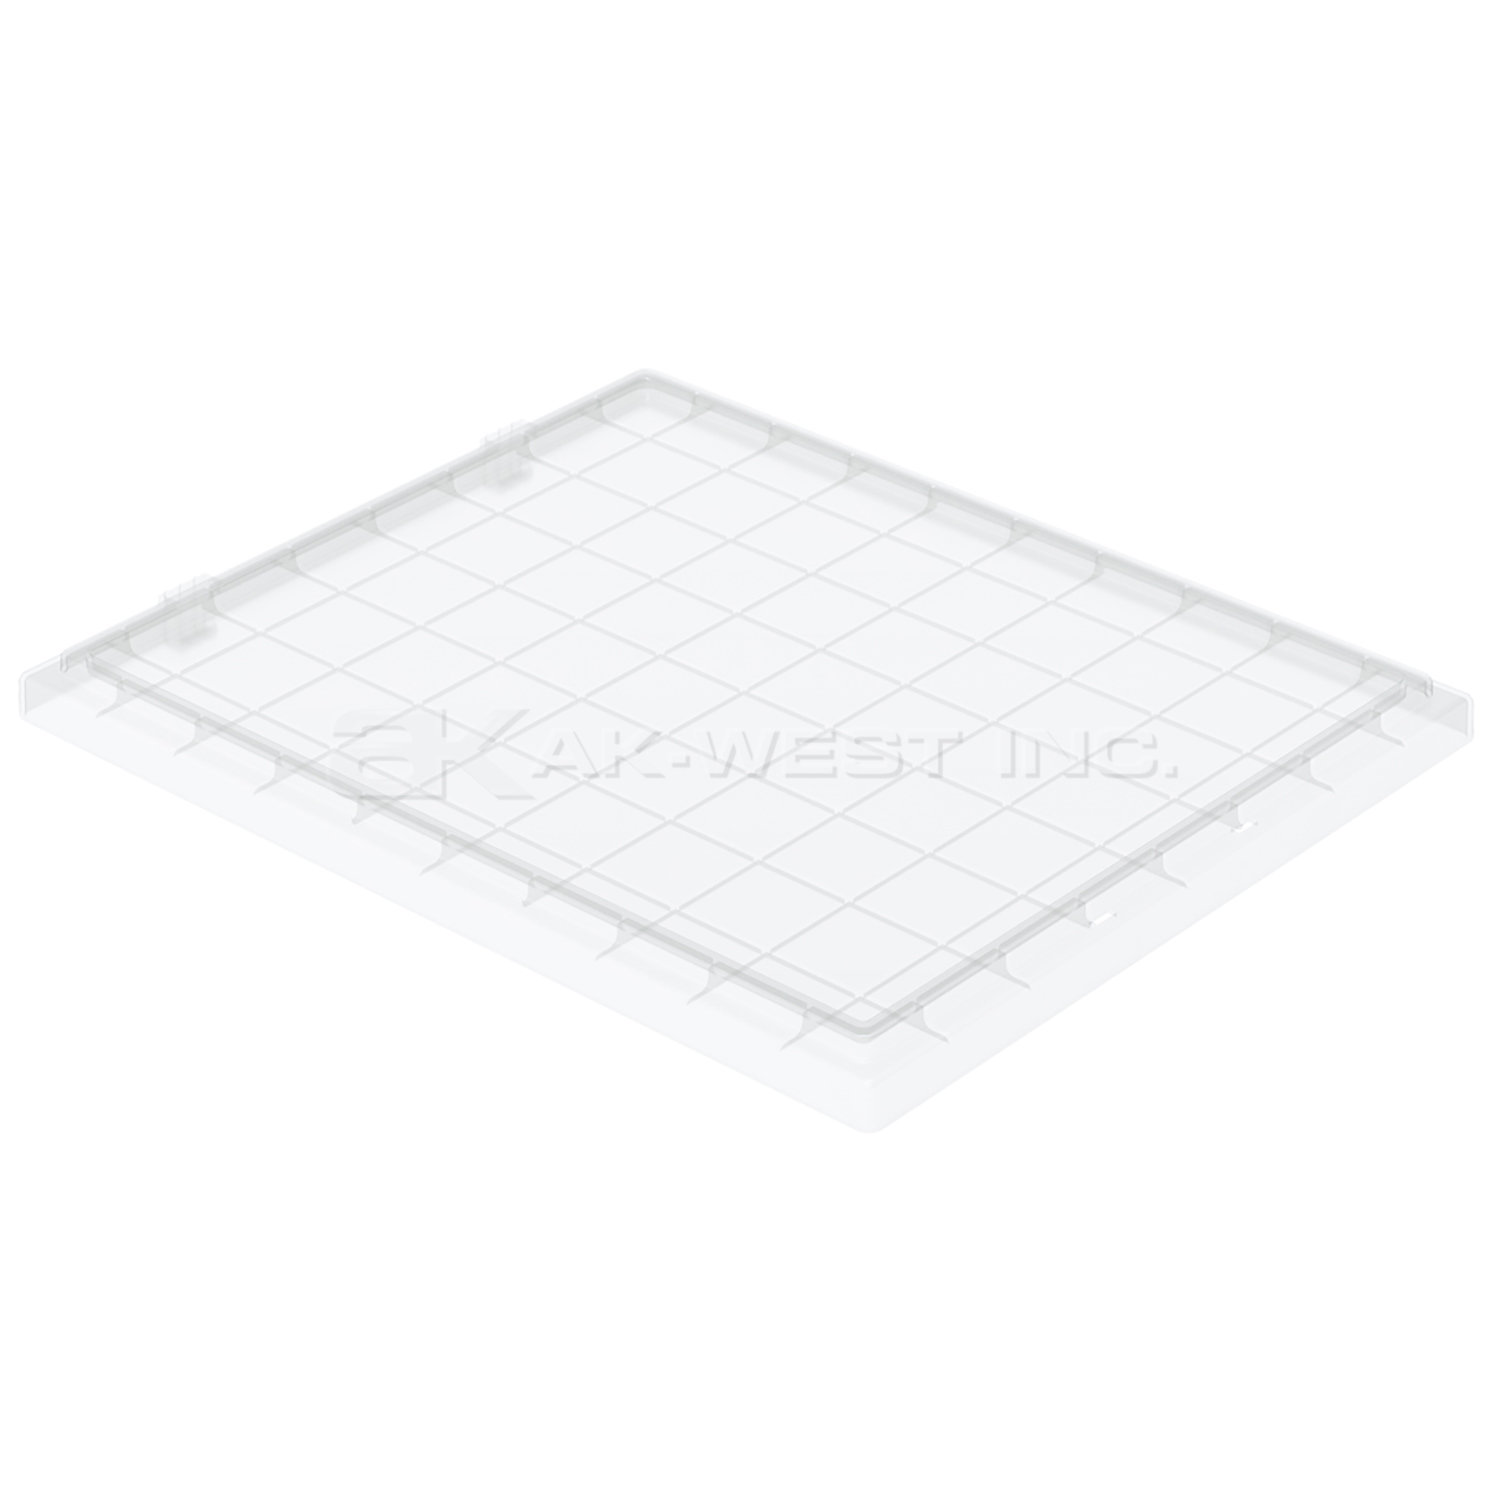 Clear, Lid For 35230 (3 Per Carton)